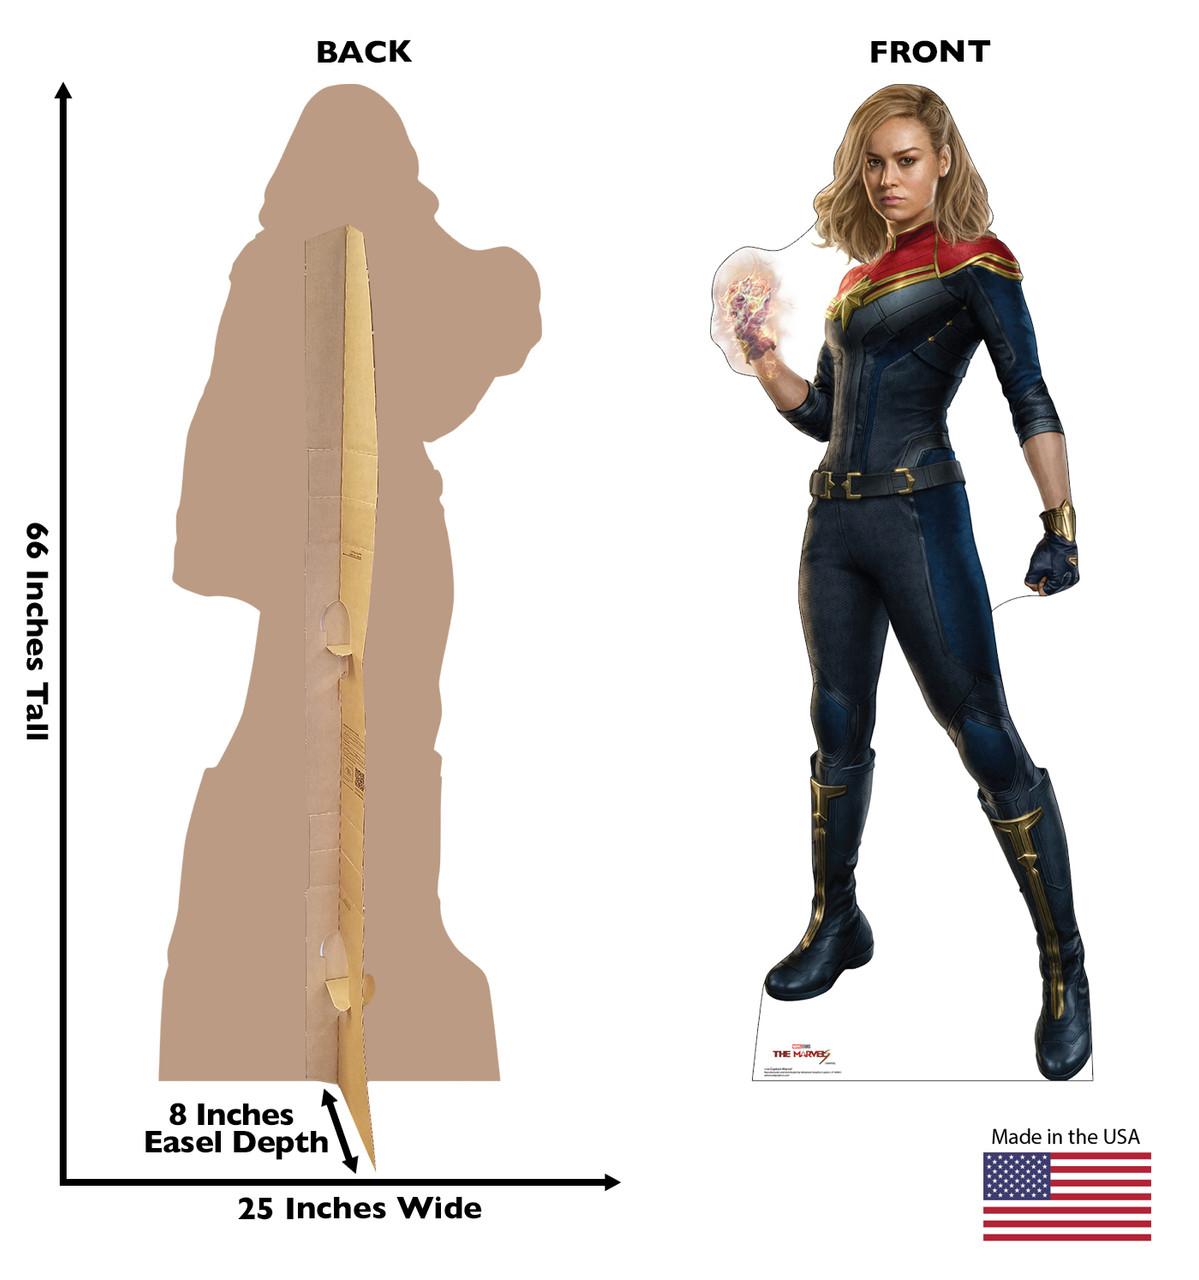 Life-size cardboard standee of Captain Marvel with back and front dimensions.